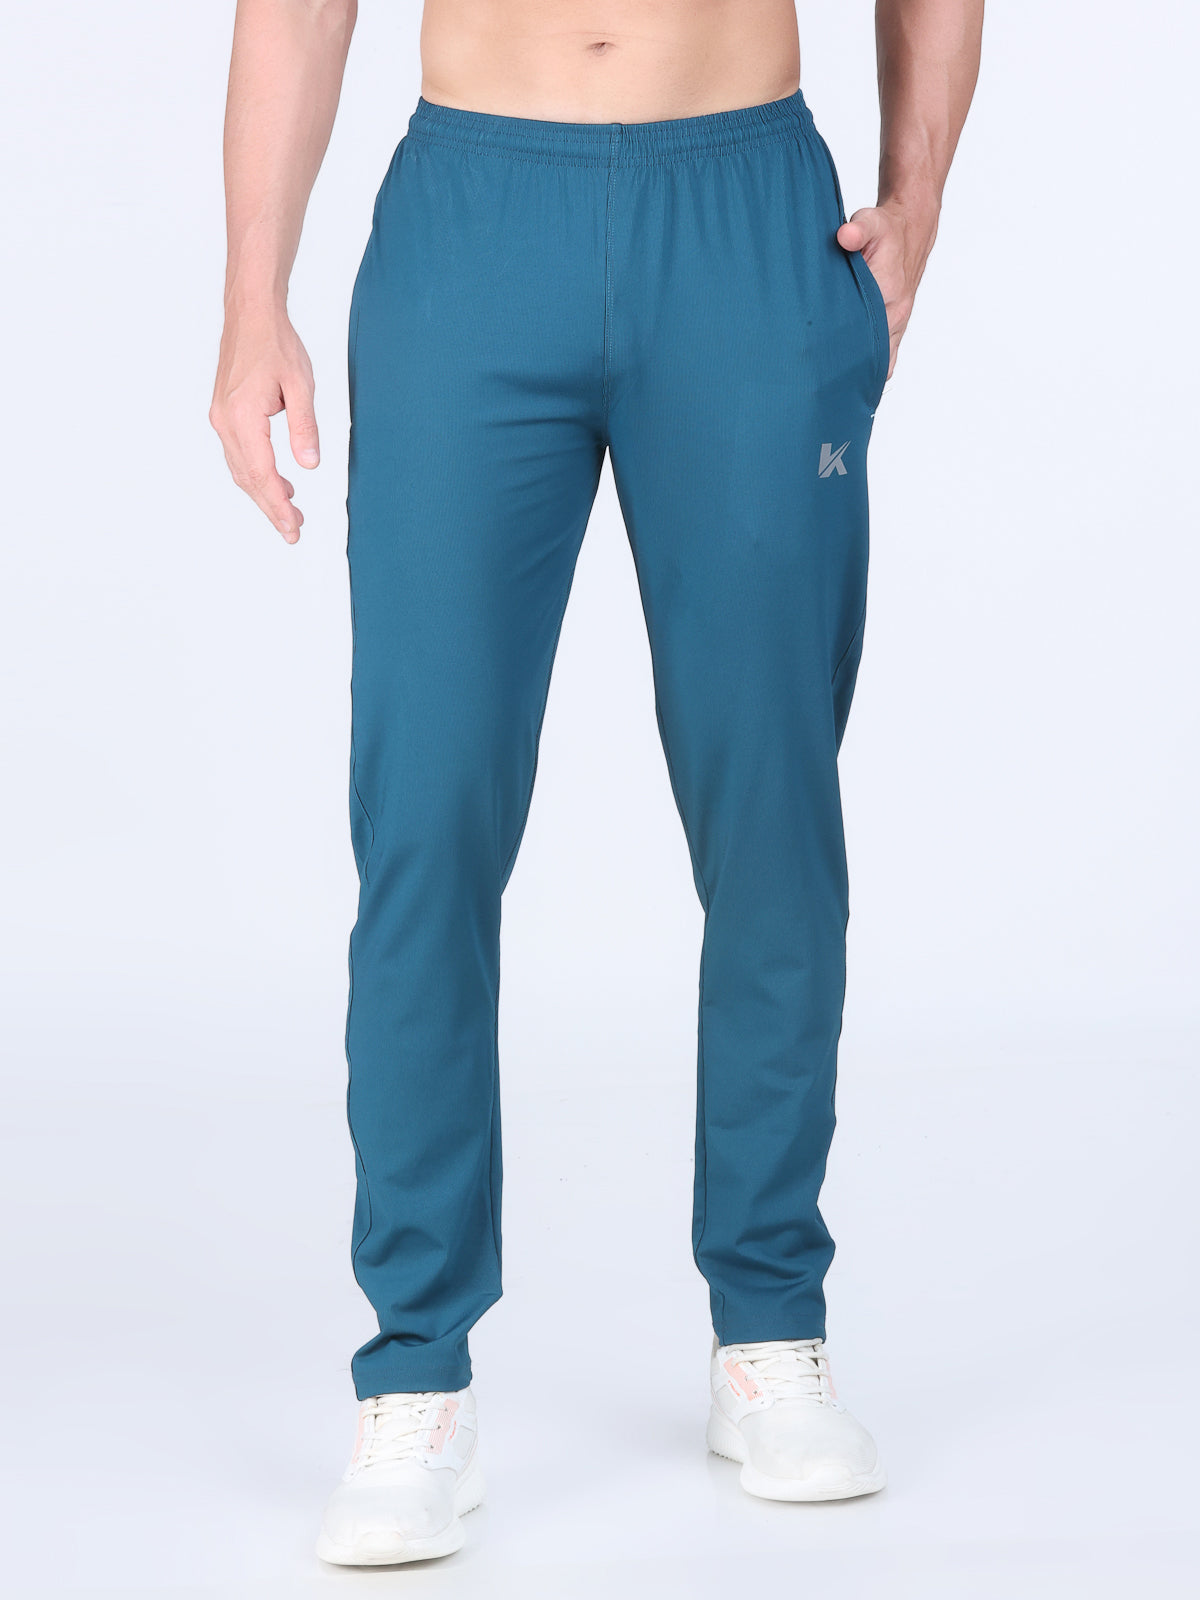 Combo of 2 Men's 4 Way Stretch Lining Pista and Turquoise Track Pant